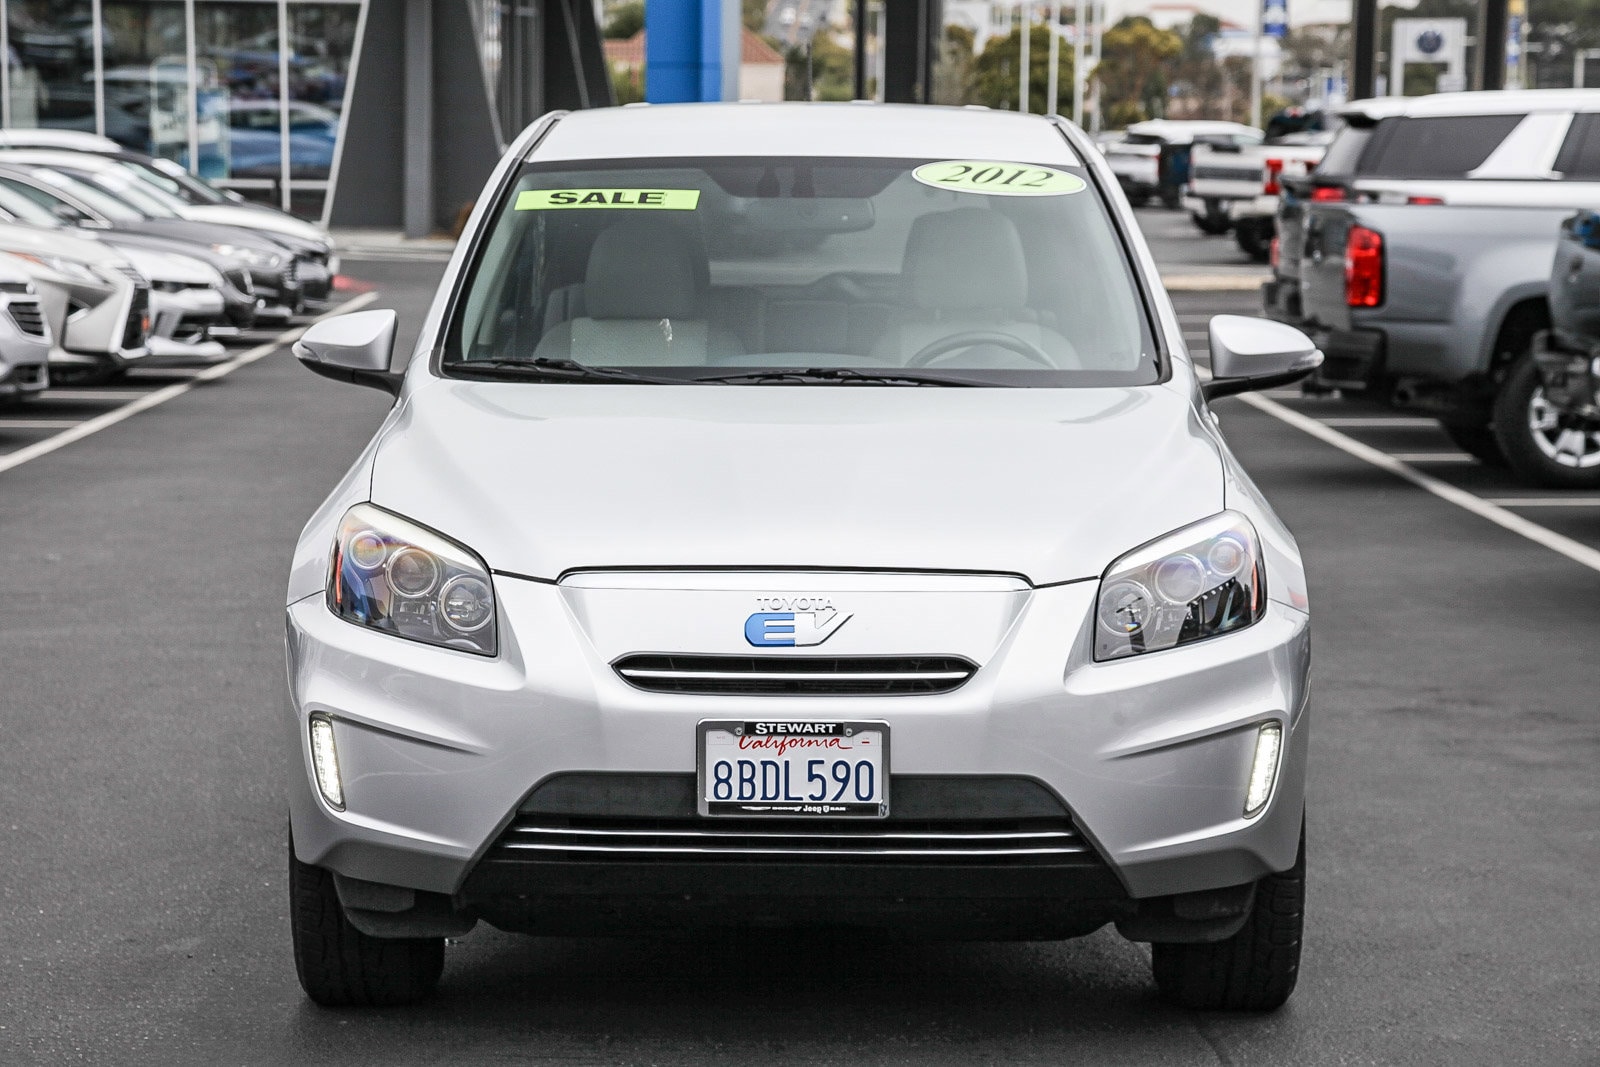 Used 2012 Toyota RAV4 EV with VIN 2T3YL4DVXCW001180 for sale in Colma, CA